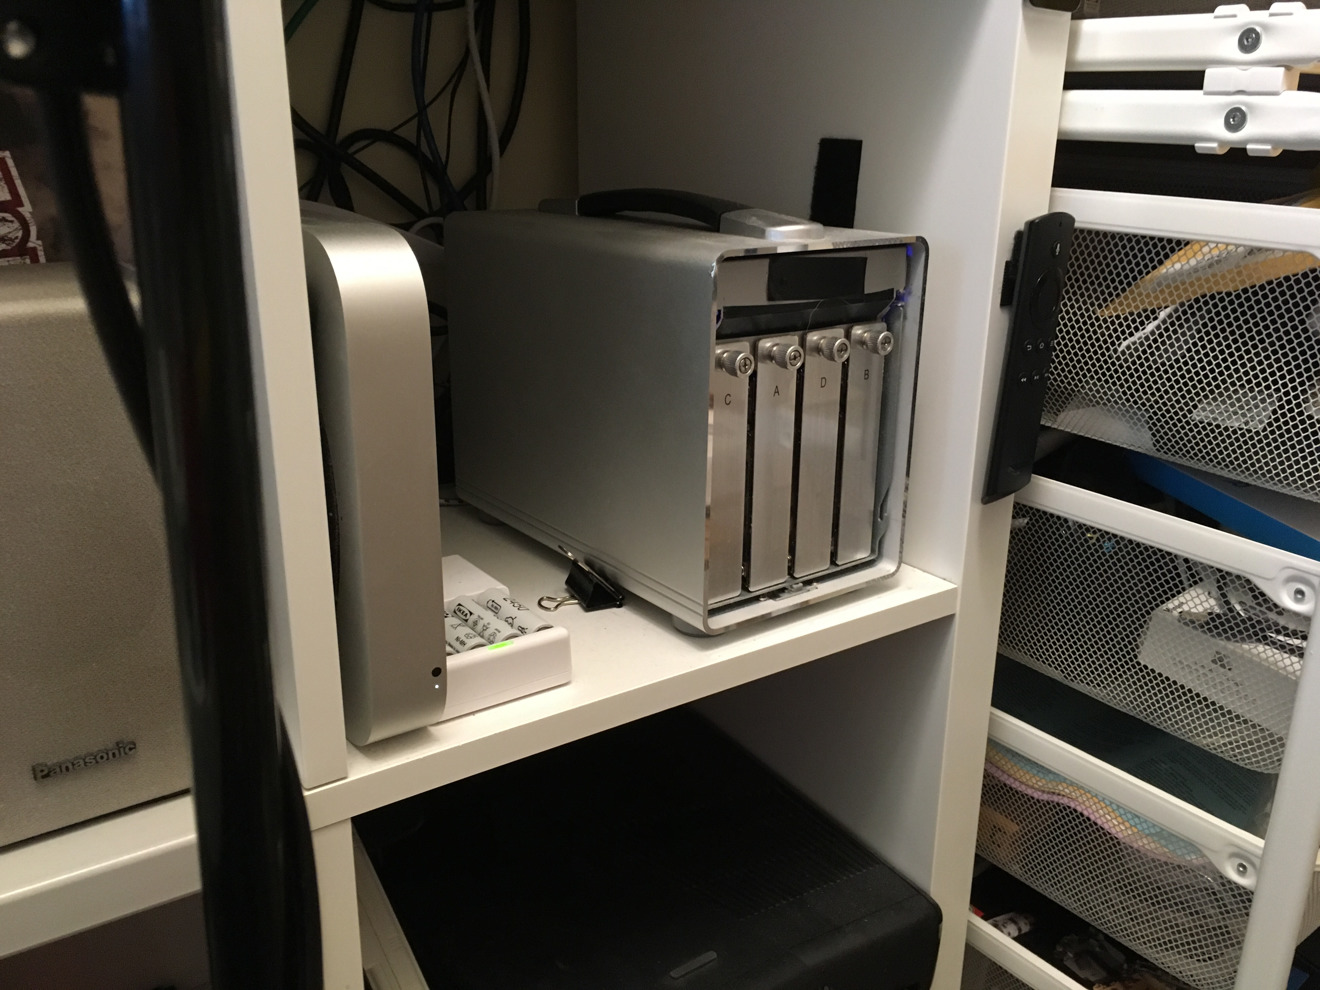 Why you want a macOS home server, and how to get one going